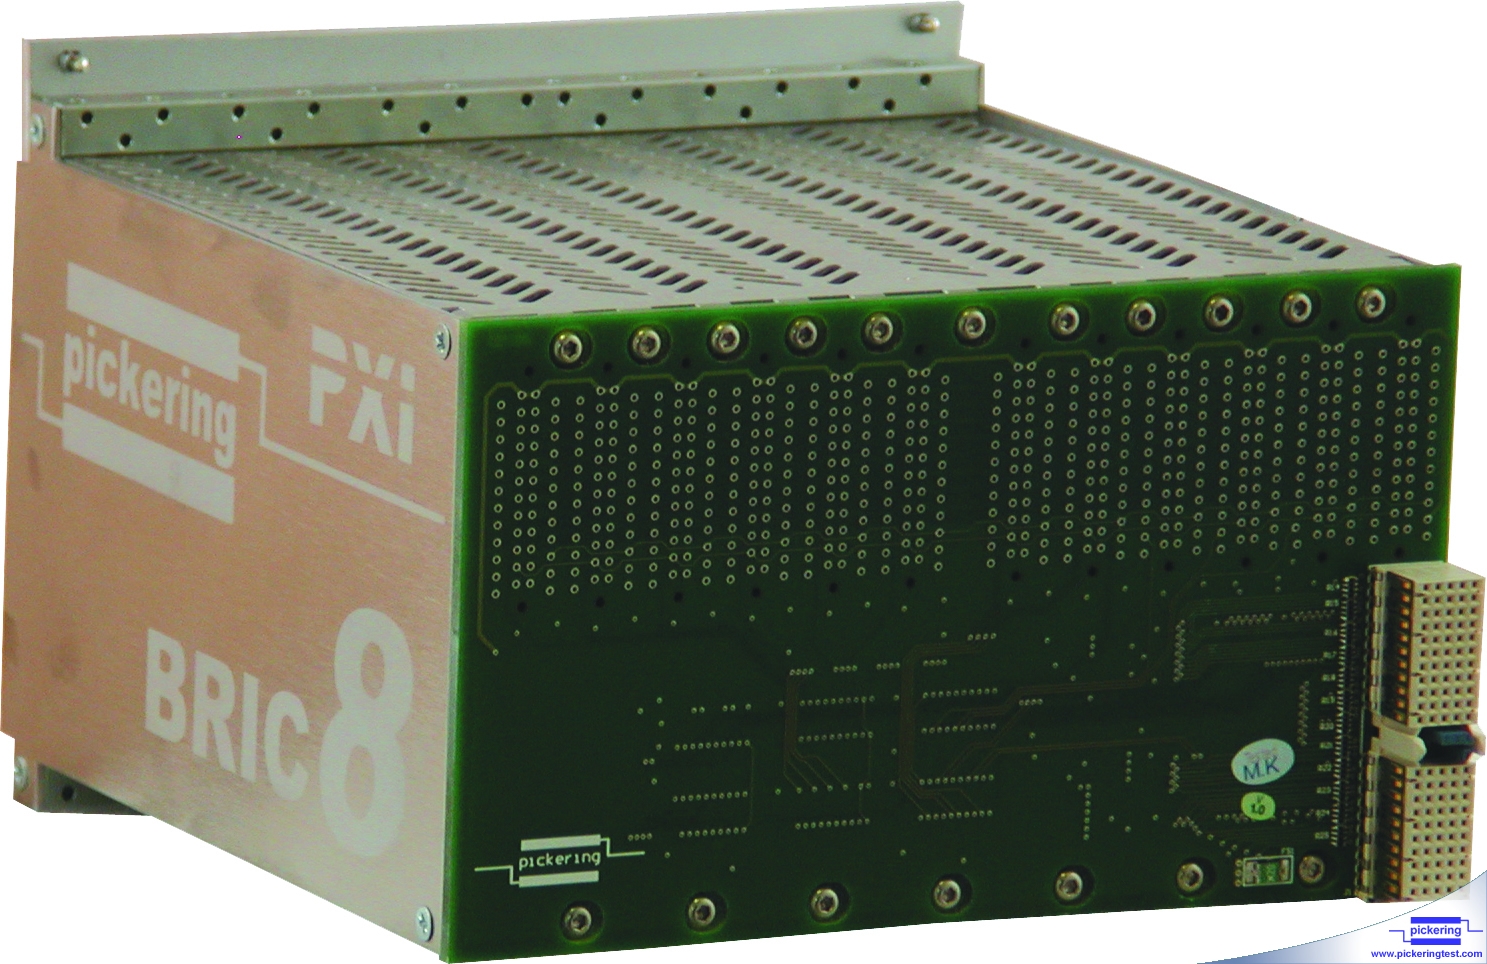 Rear view of a BRIC module, the connector on the right is the connector that plugs into the PXI backplane